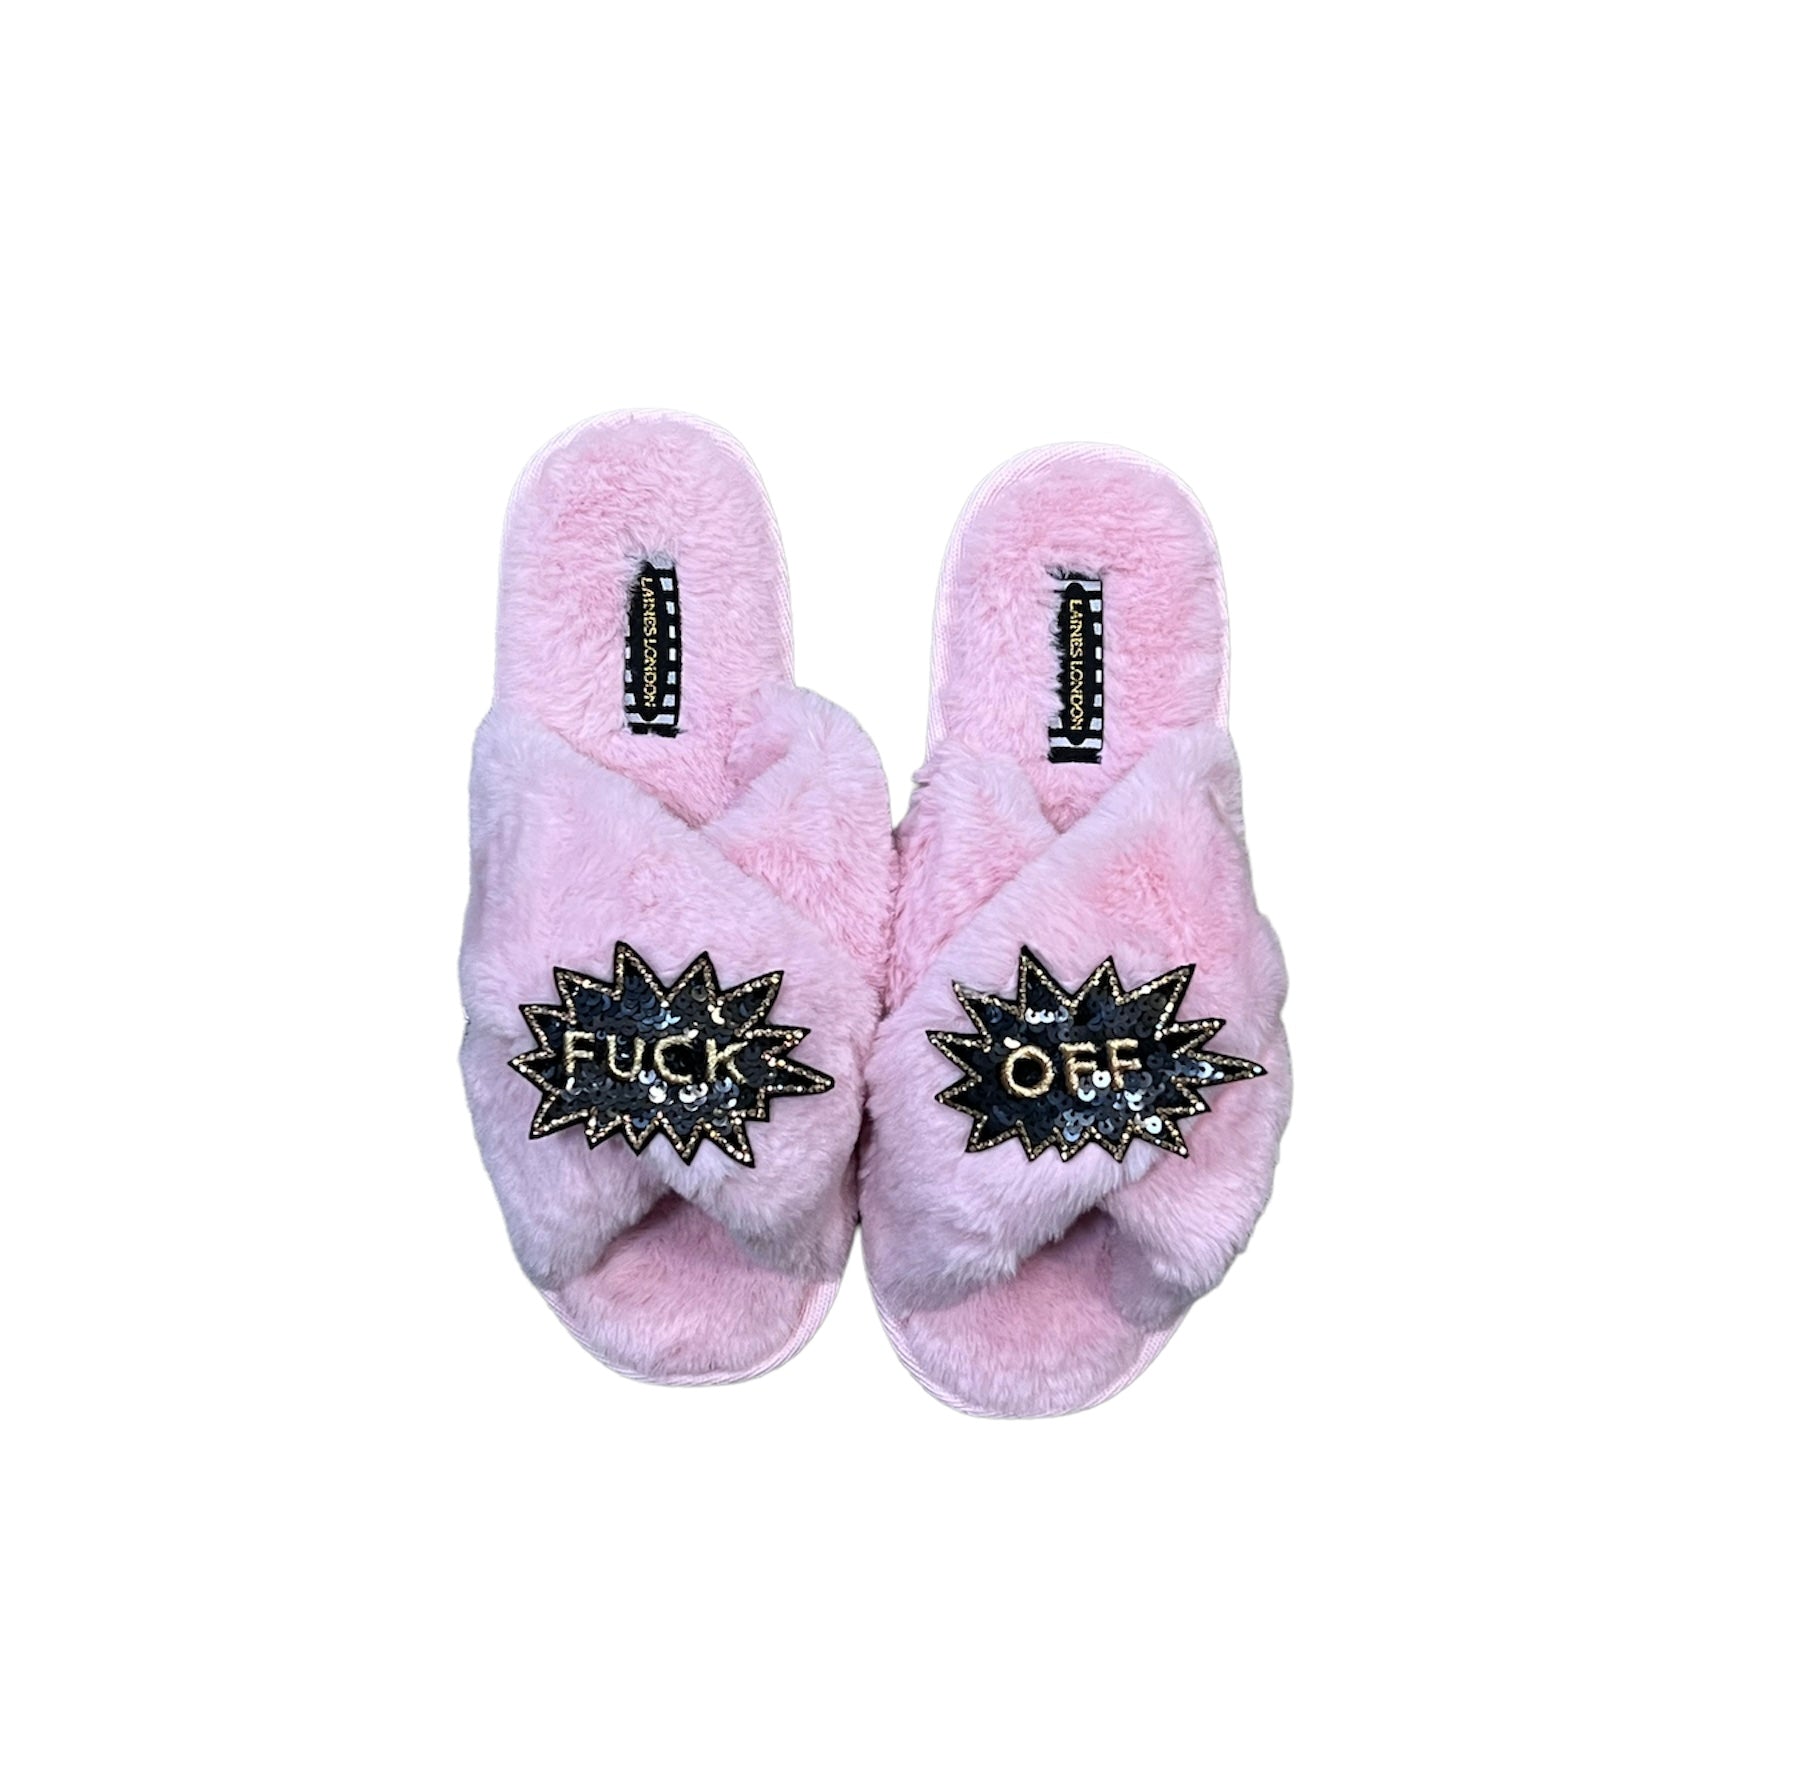 PINK FUCK OFF SLIPPERS